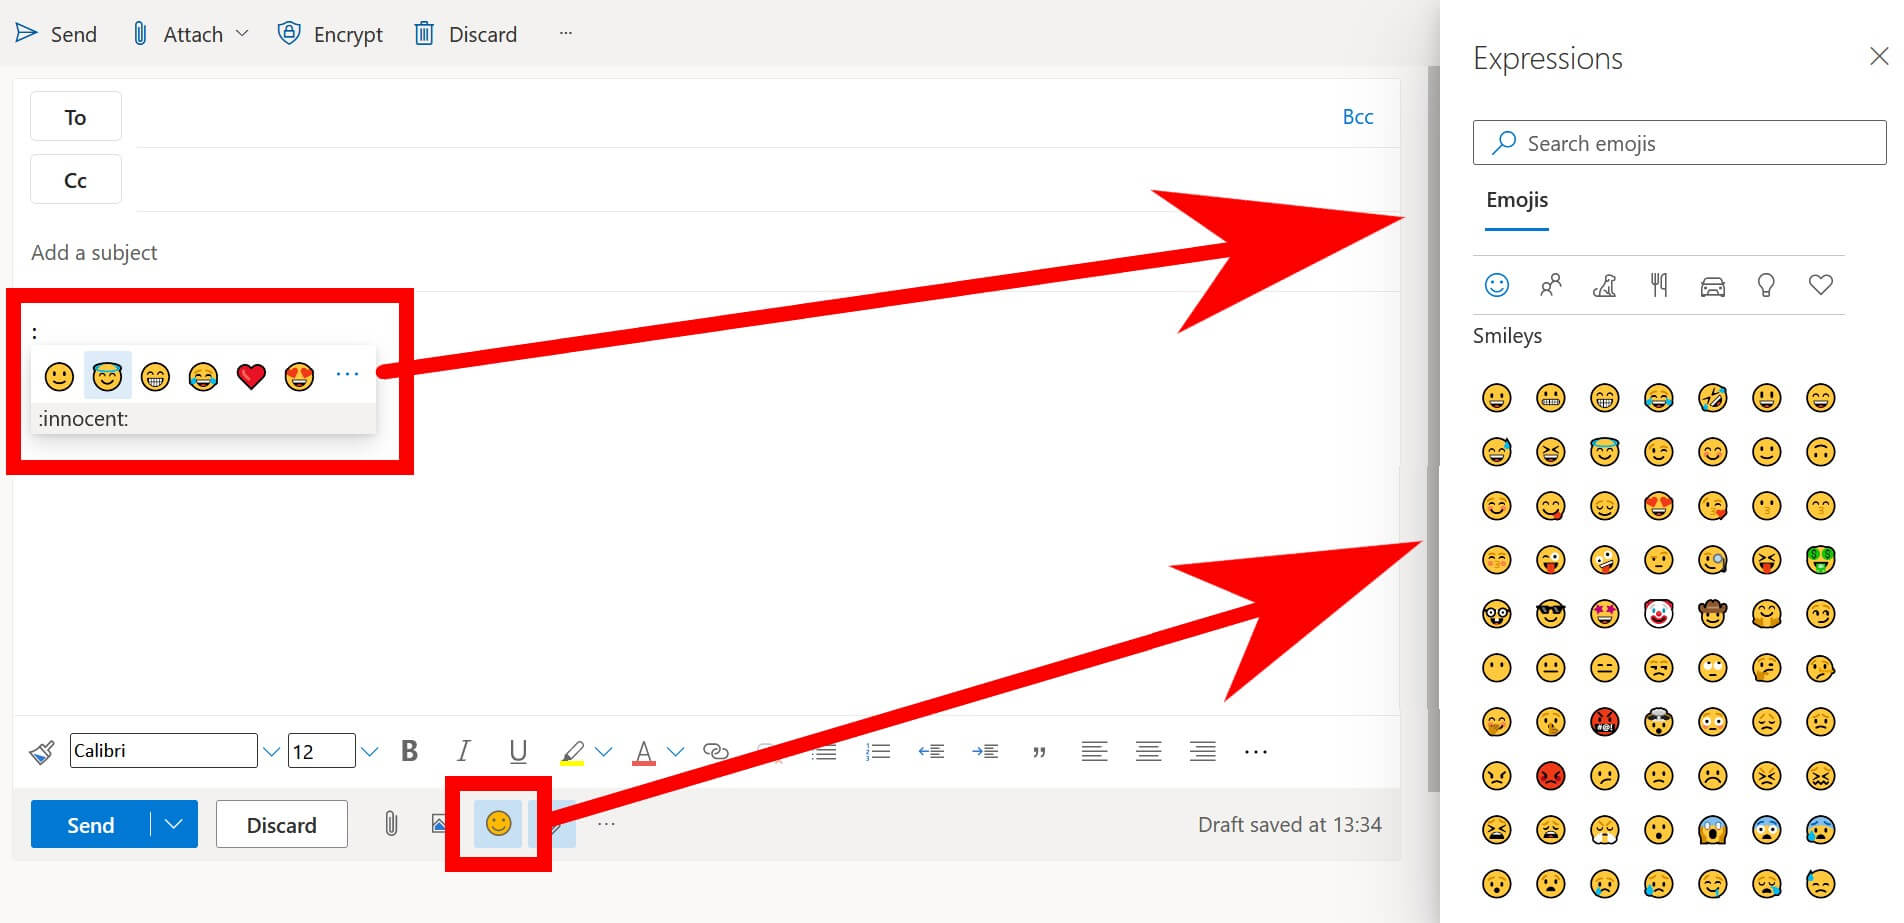 Outlook on the Web: emoji options when composing messages